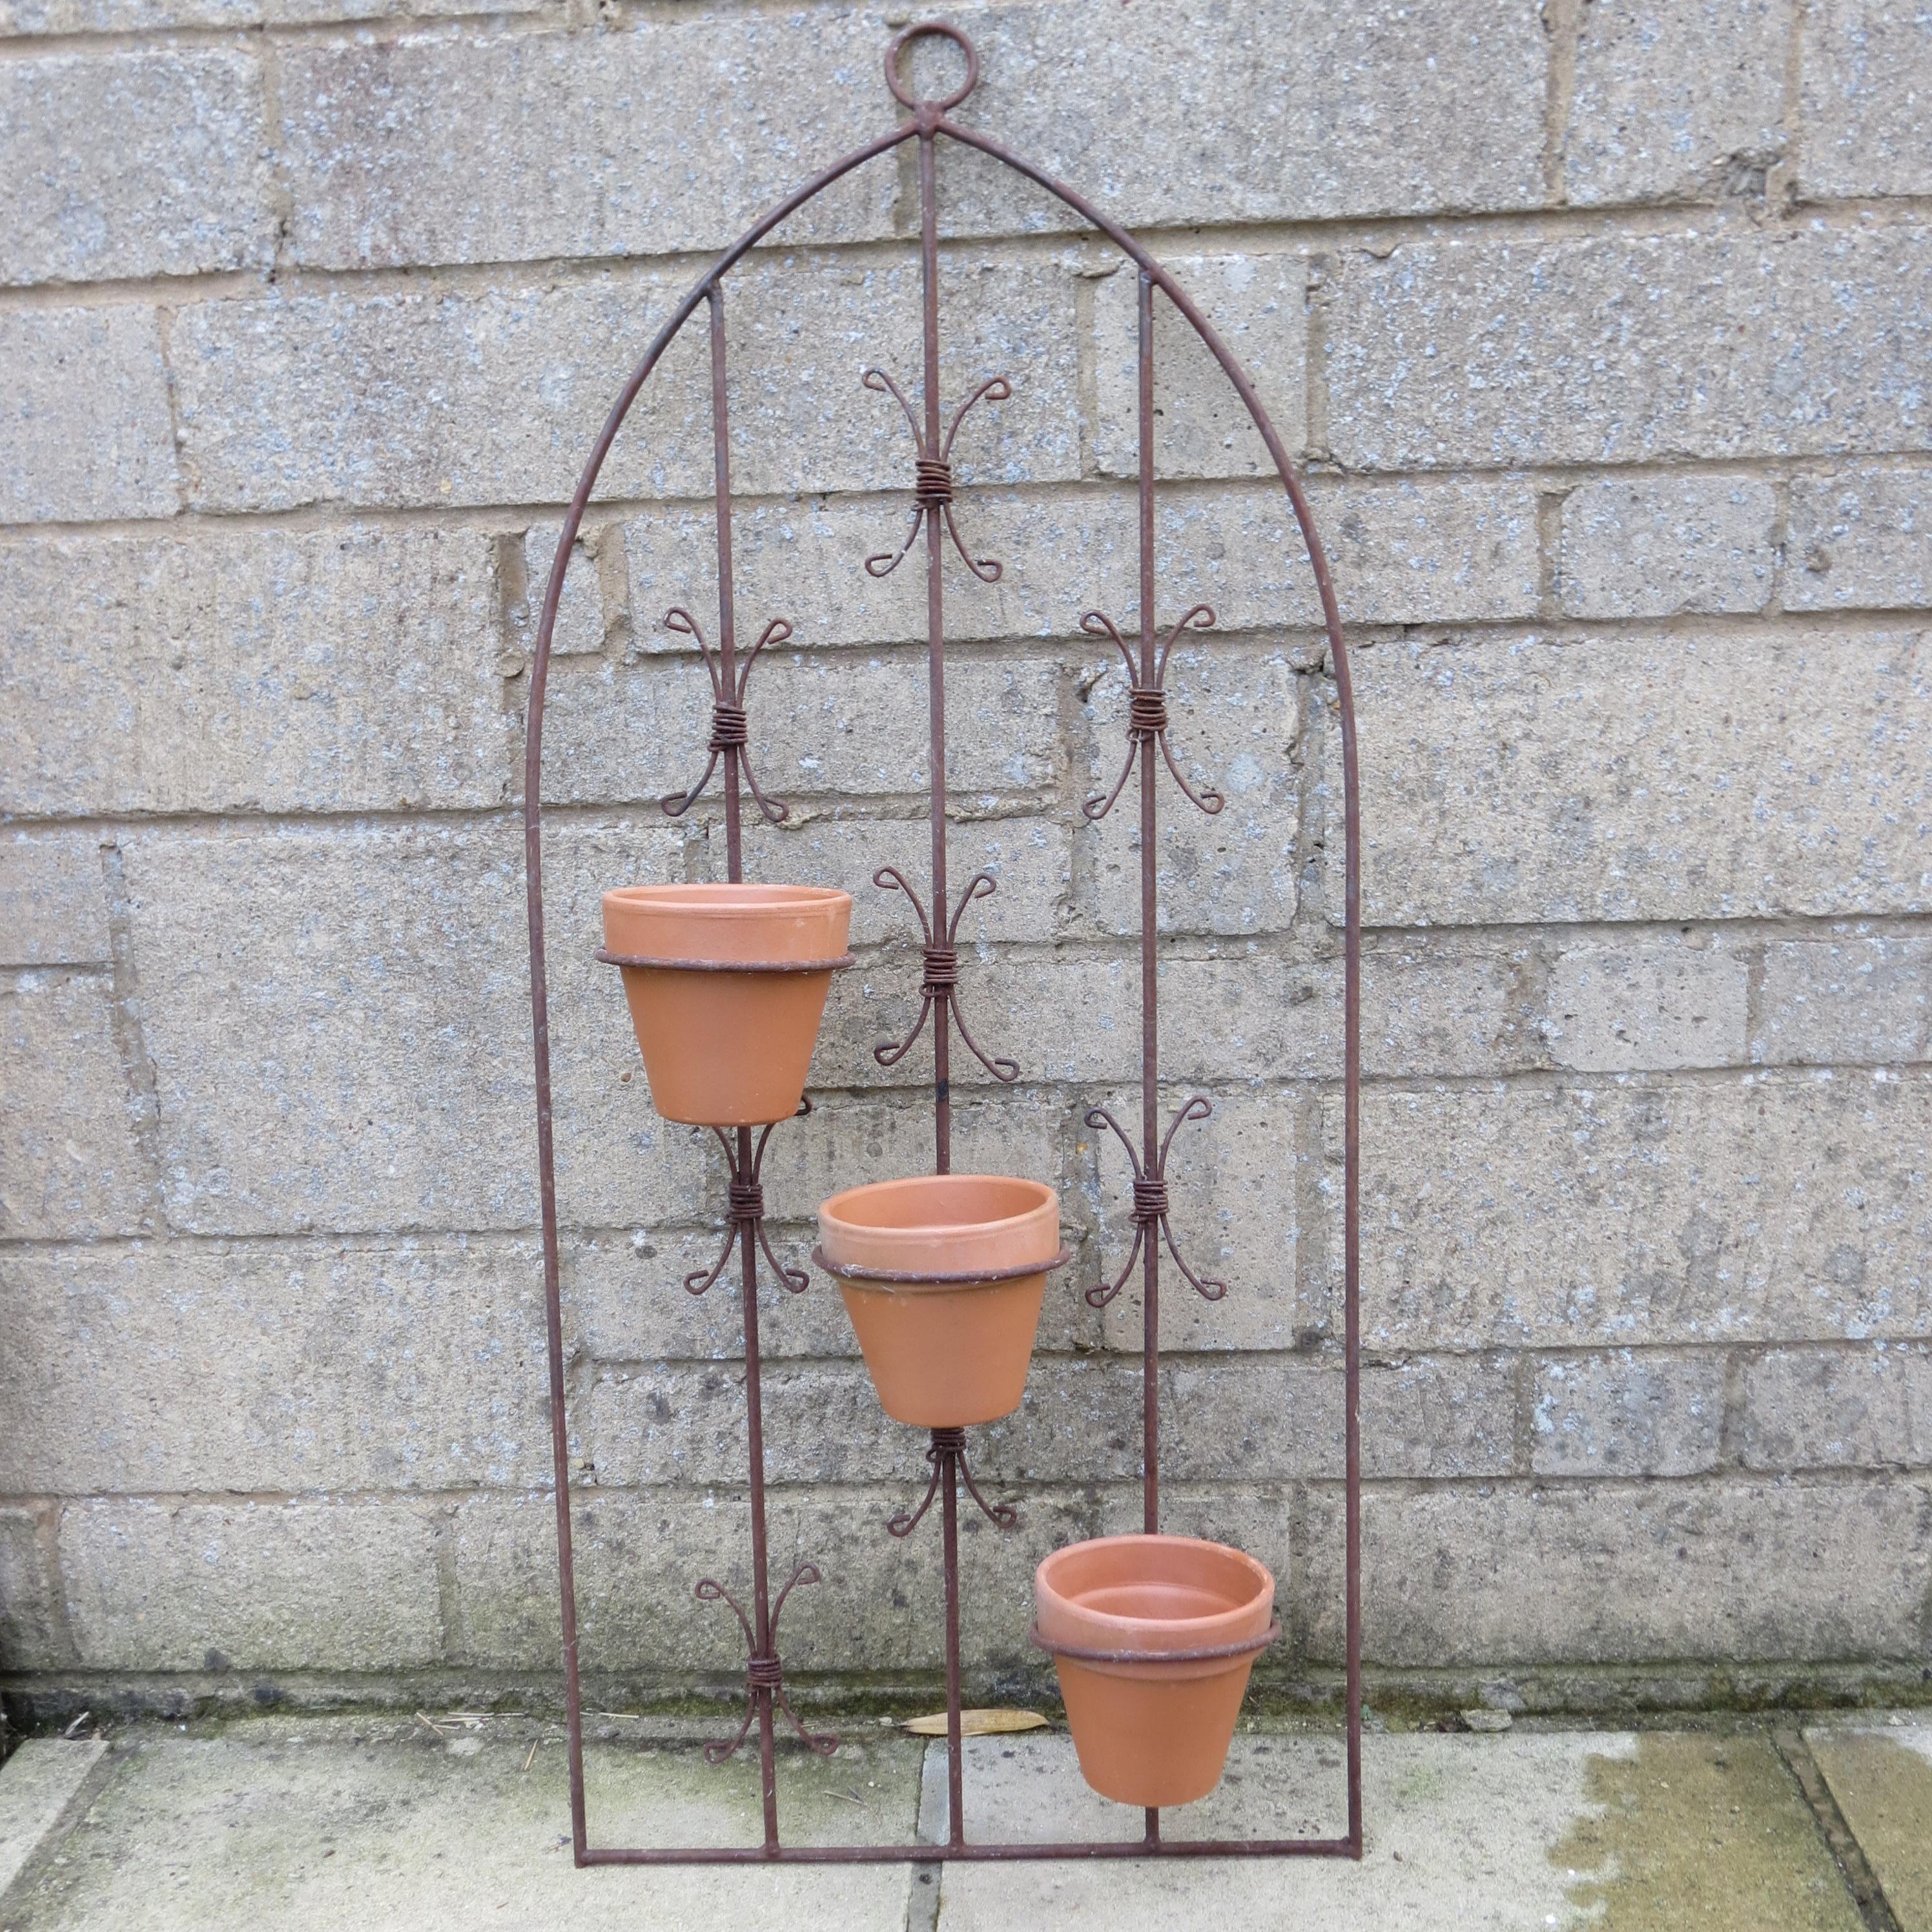 Rustic Vintage Decorative Metal Wall Hanging Planter 2 Available